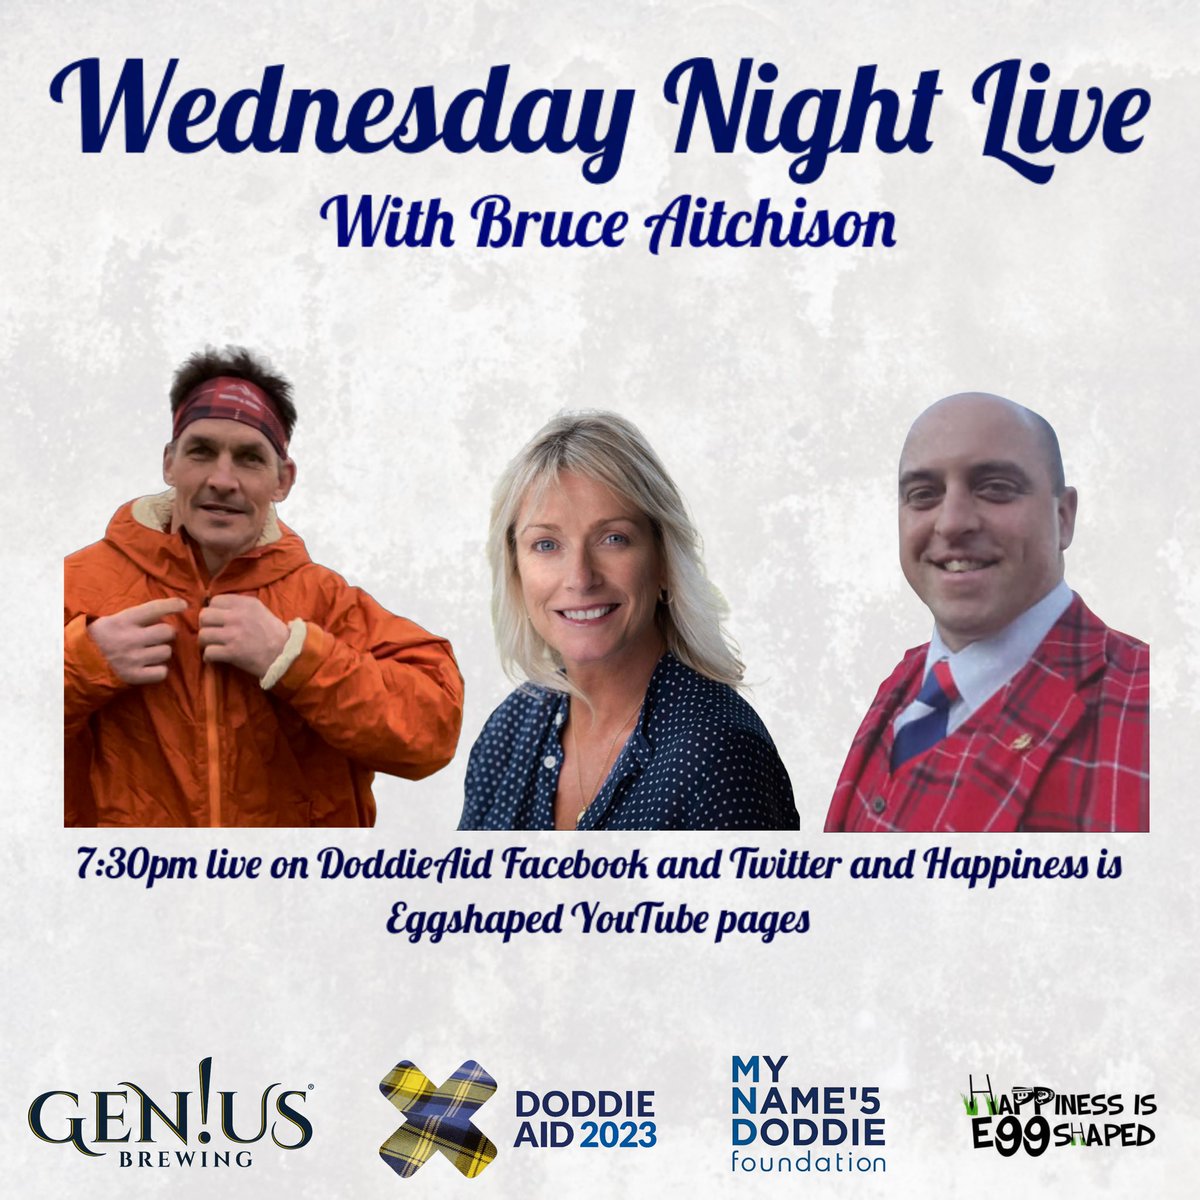 Tomorrow night at 7:30pm we go live with Bruce to talk all things sign ups and DoddieAid, join us for what should be a cracking half hour! #doddieaid2023 #doddieweir #doddieaid #mnd